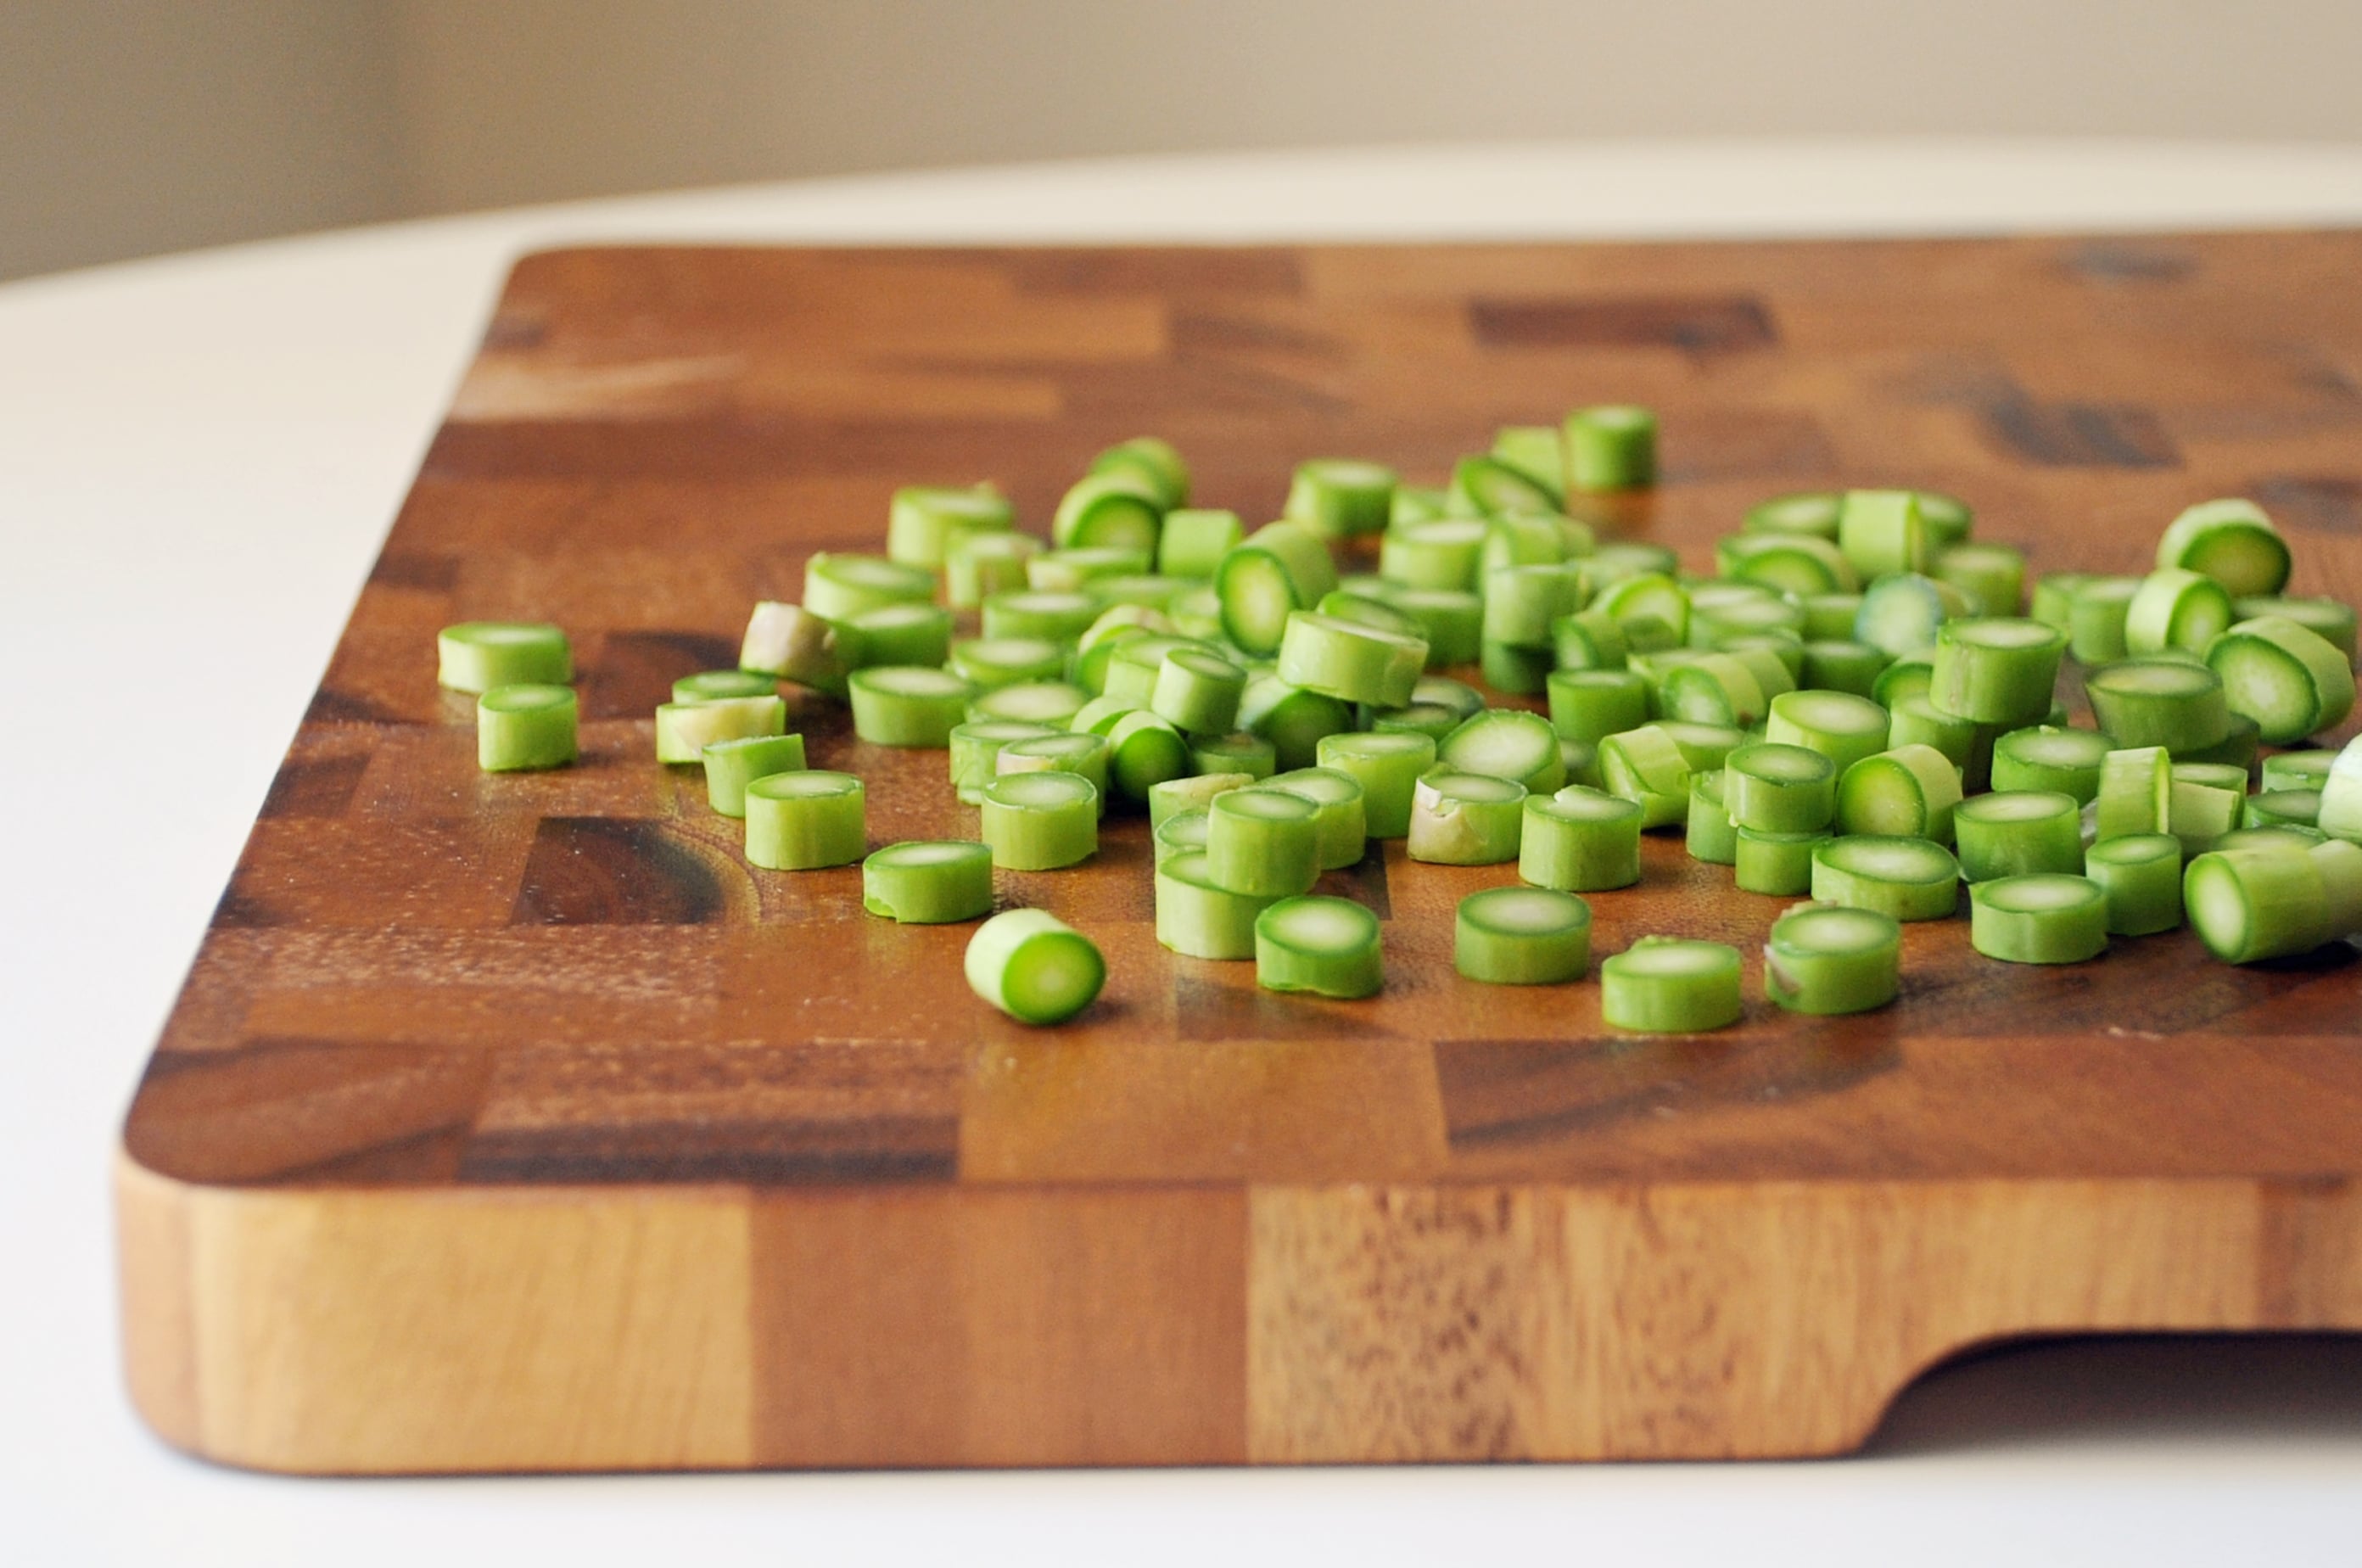 This Viral Gadget From  Chops Veggies In Seconds & Is on